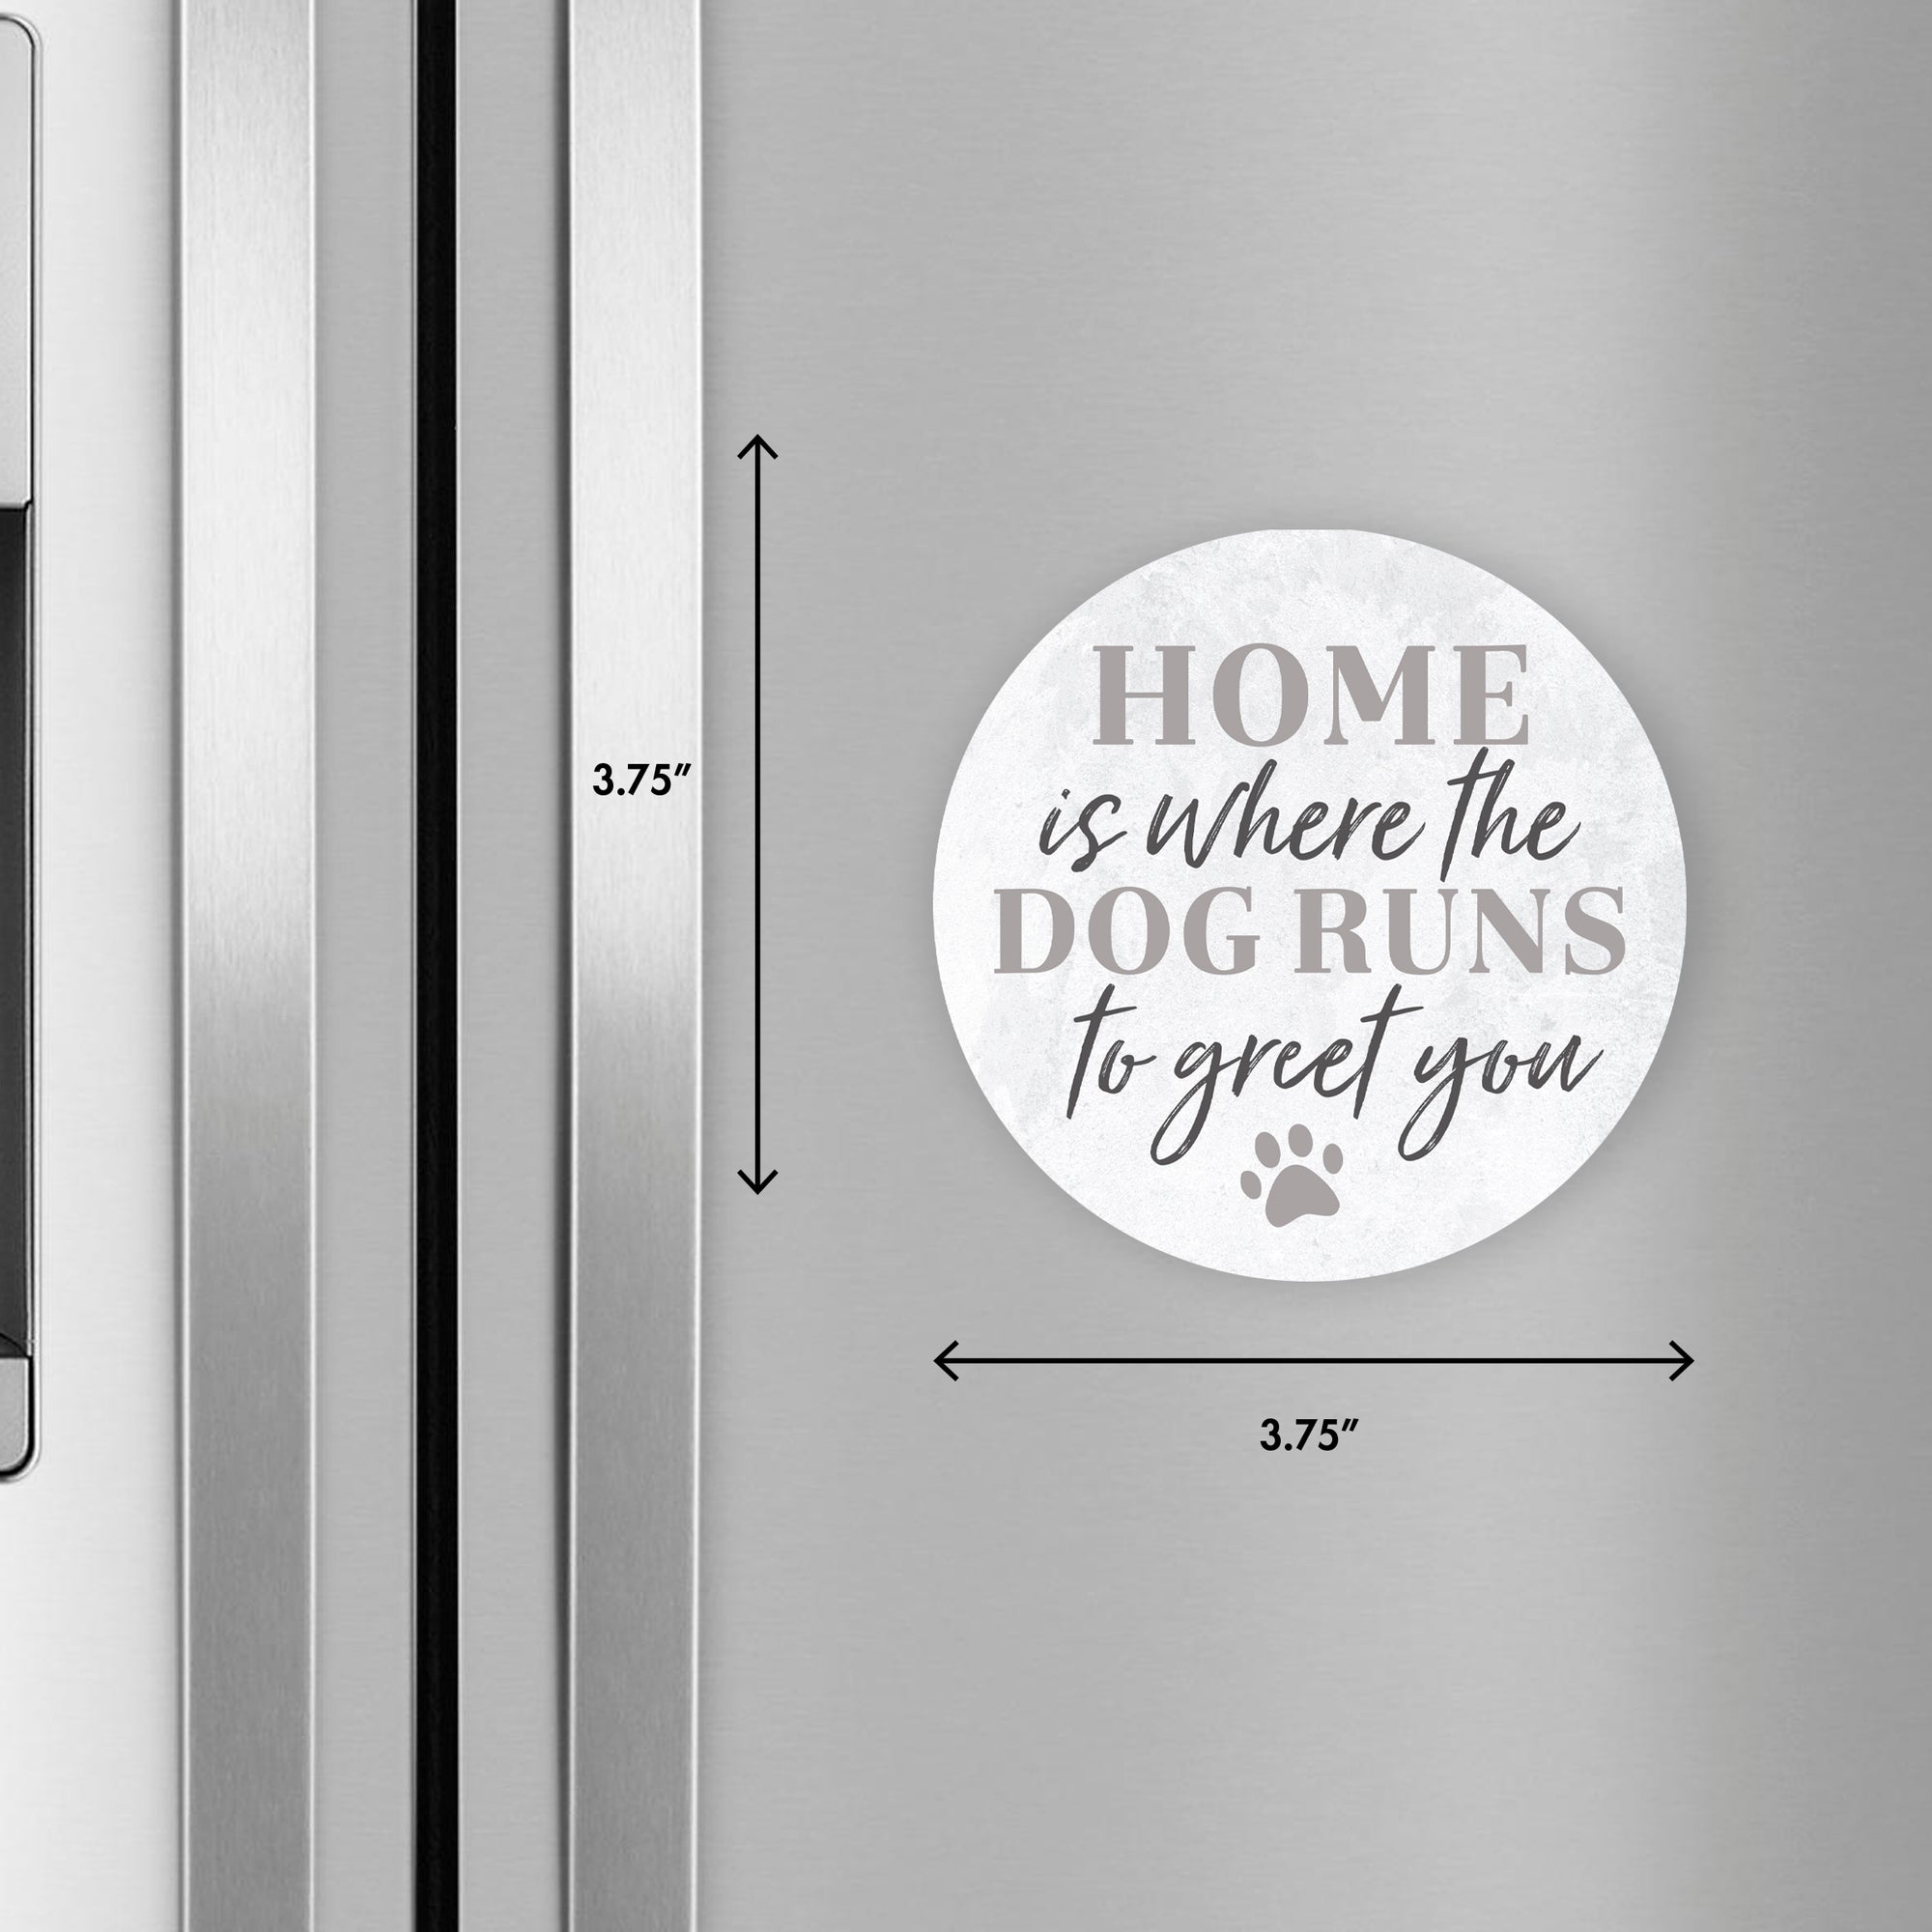 Refrigerator Magnet Perfect Gift Idea For Pet Owners - Home Is Where The Dog Run